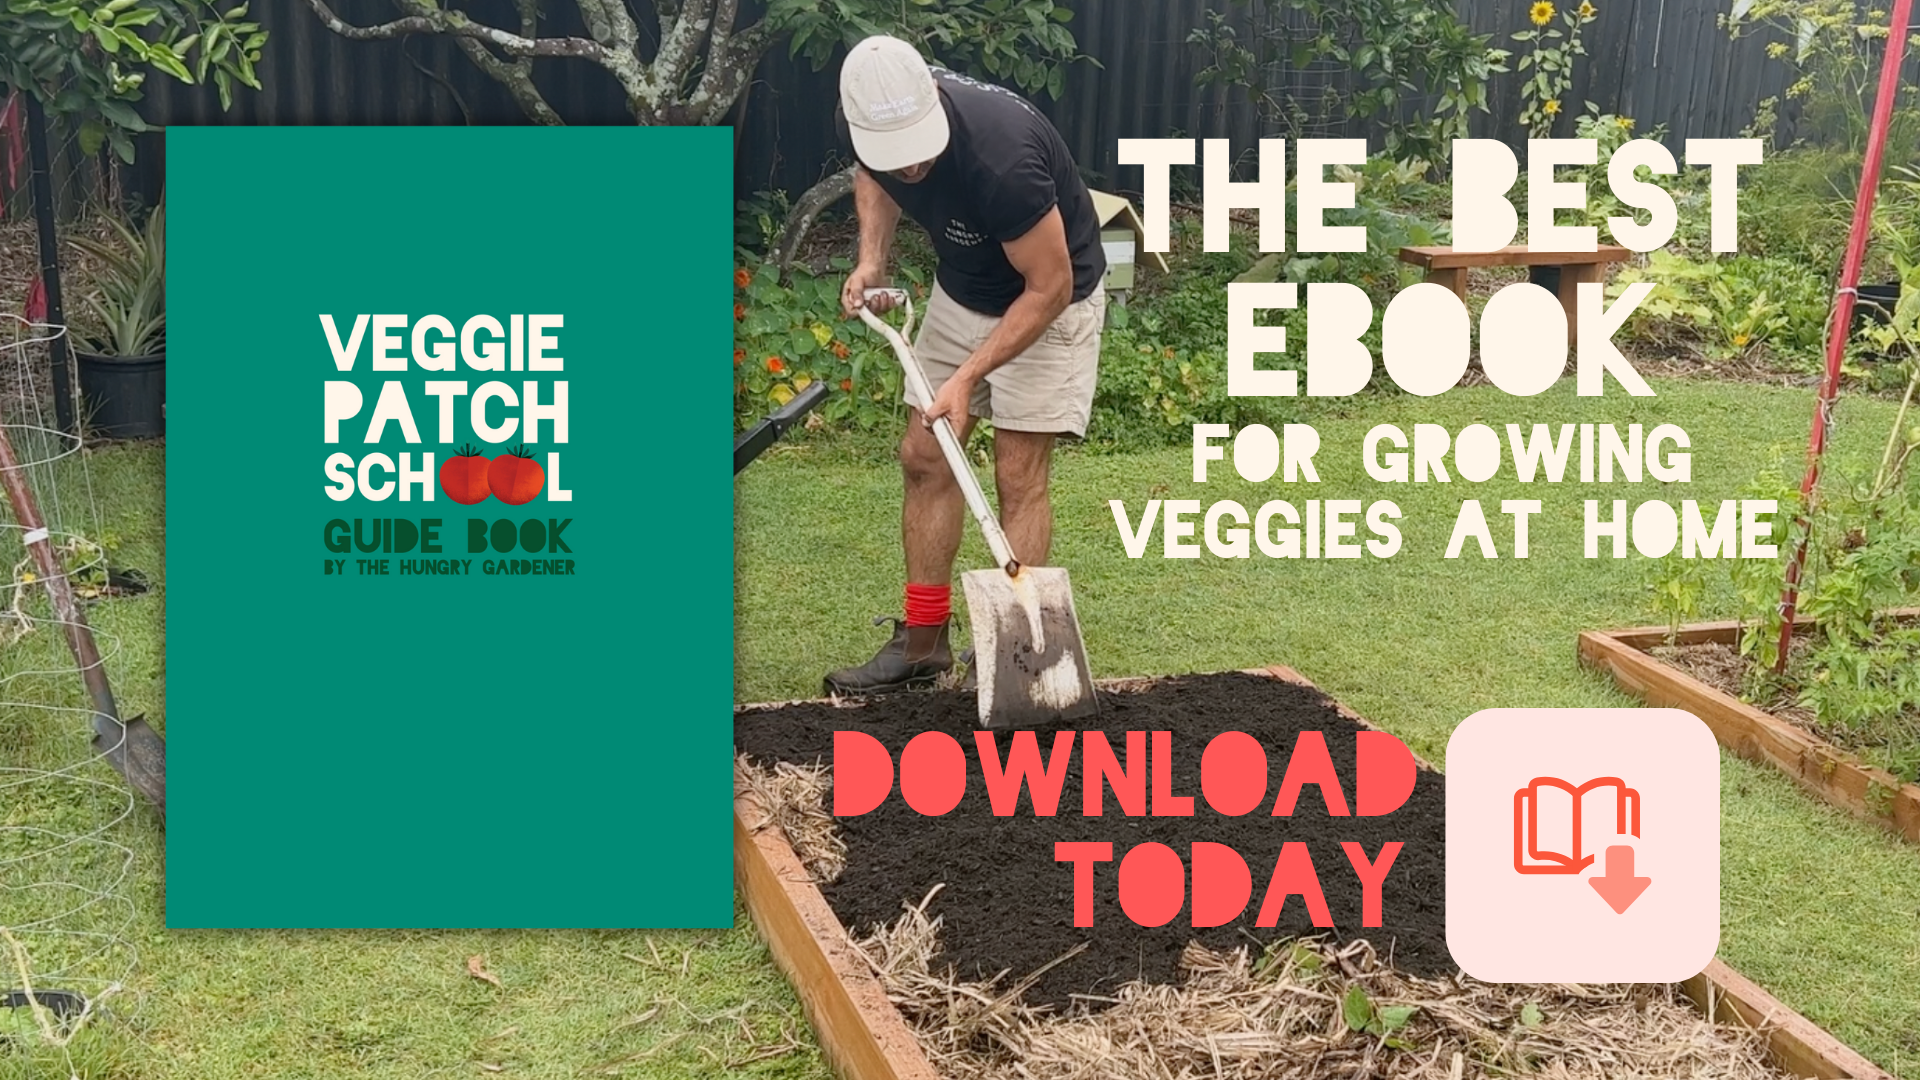 Ebook for Veggie Patch